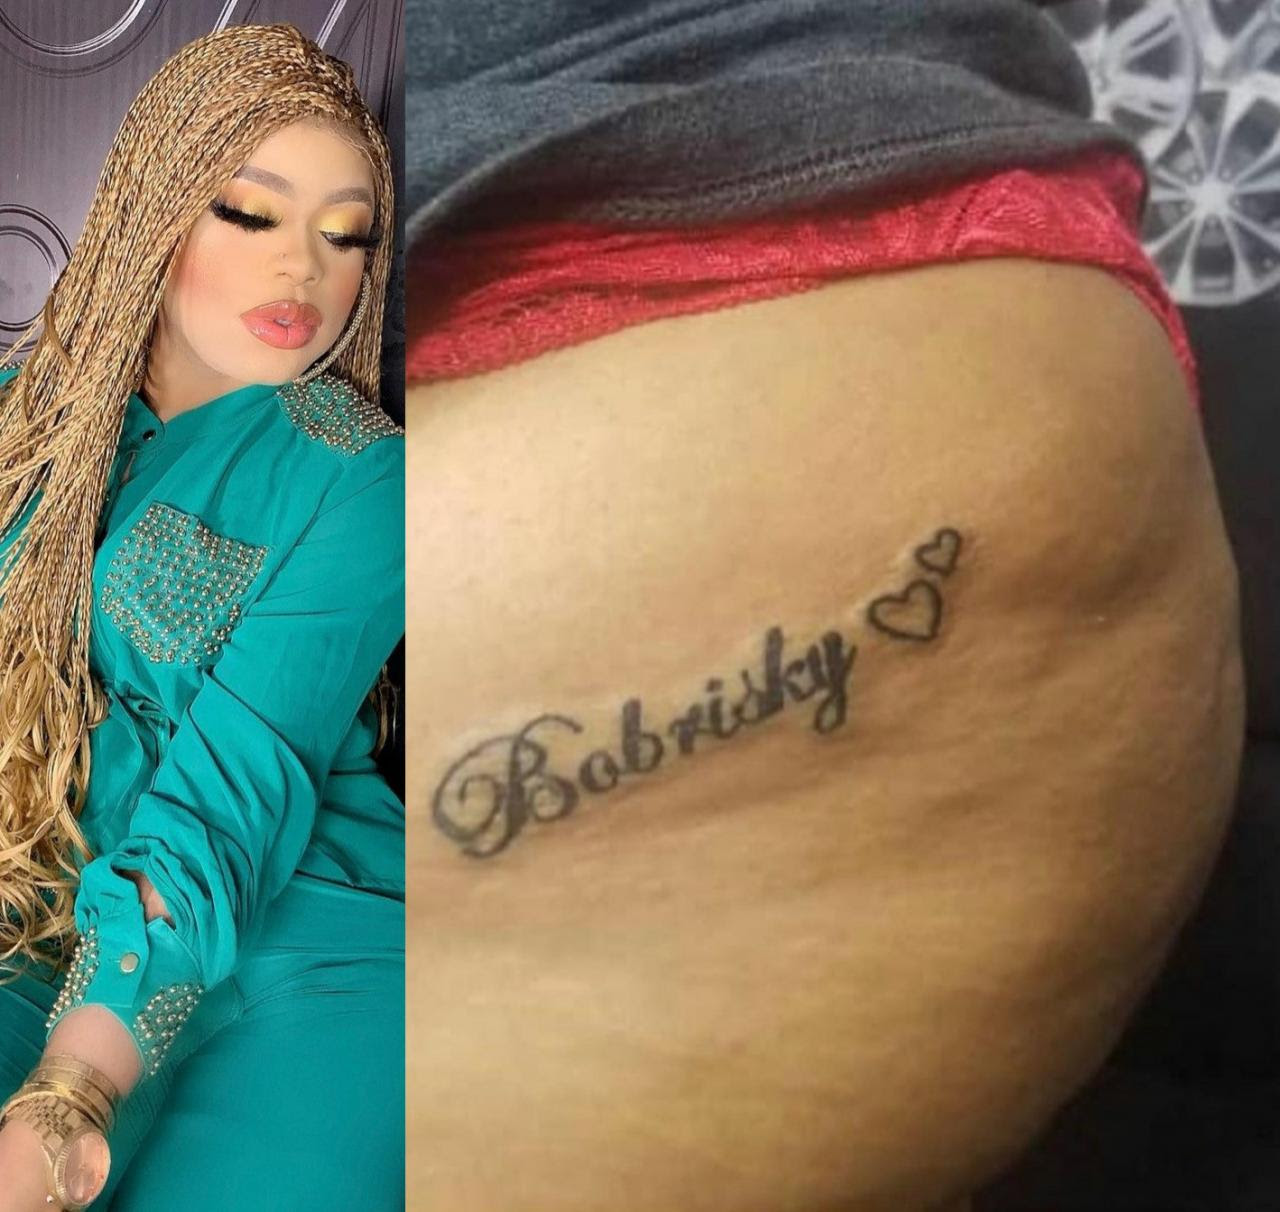 More fans get tattoo of Bobrisky, pushing the number to over a dozen (photos)